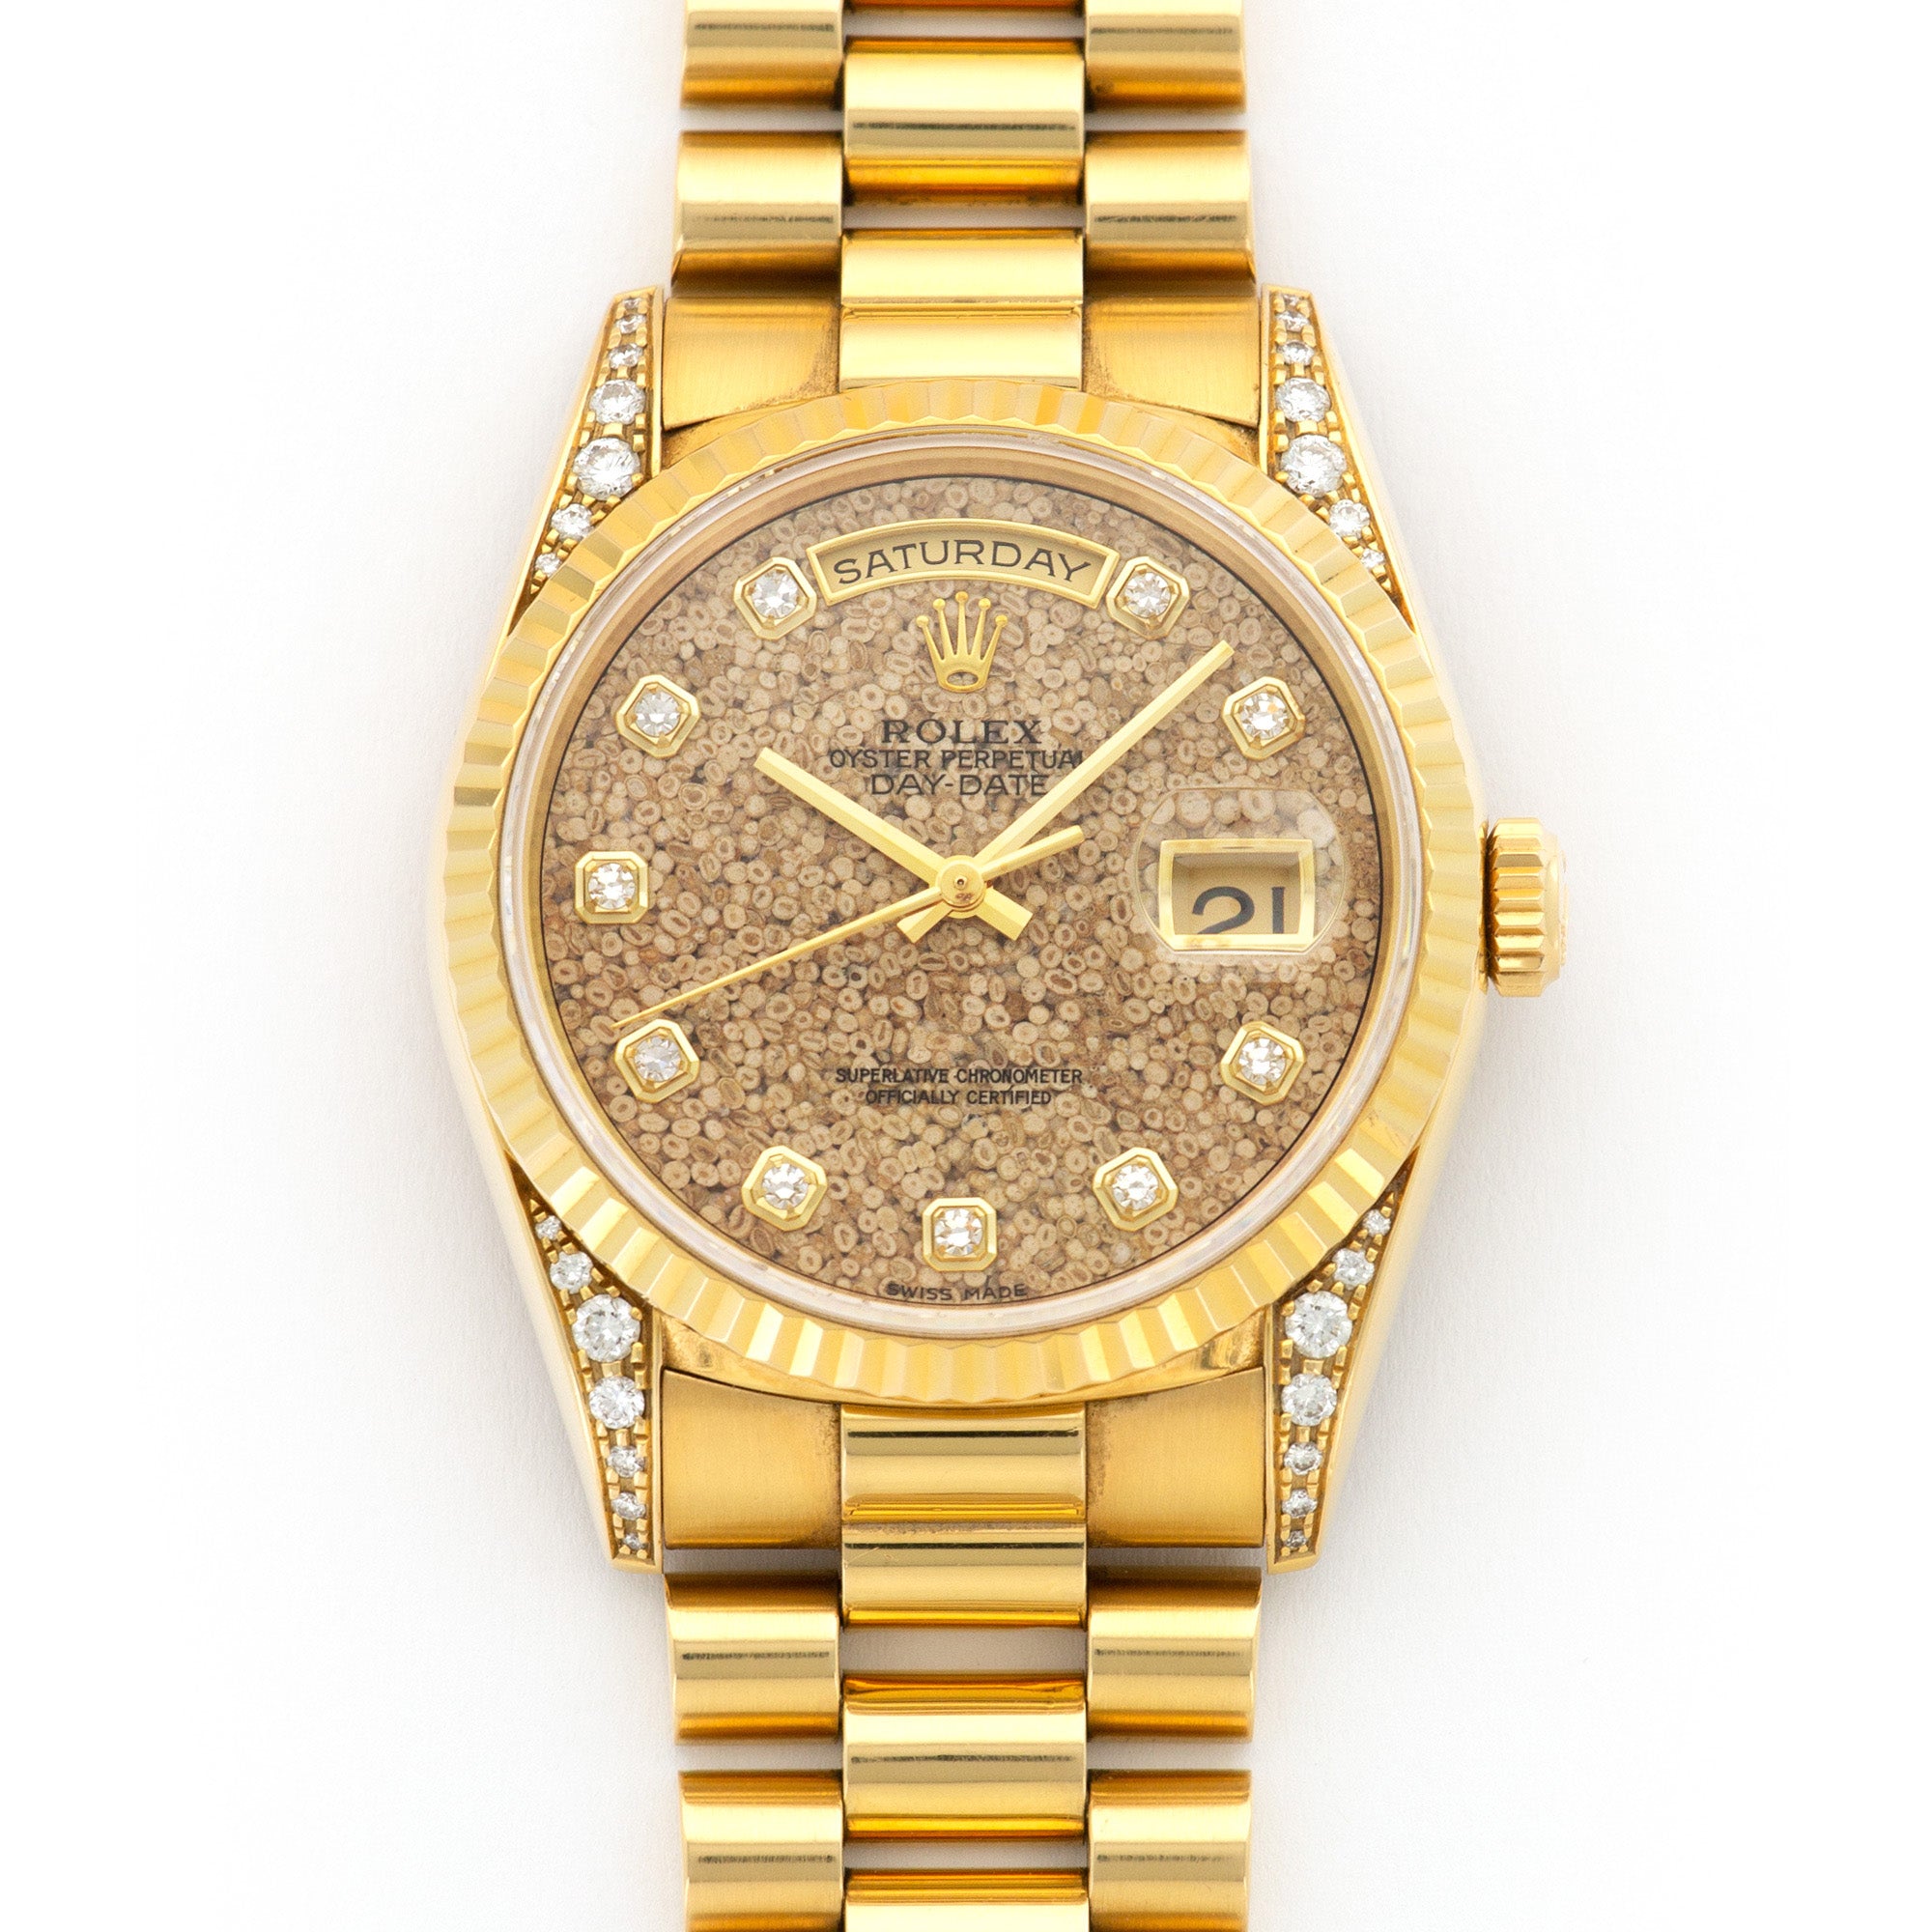 Rolex - Rolex Yellow Gold Day-Date Fossil Dial Watch Ref. 18238, Nicknamed the Jurassic Park - The Keystone Watches